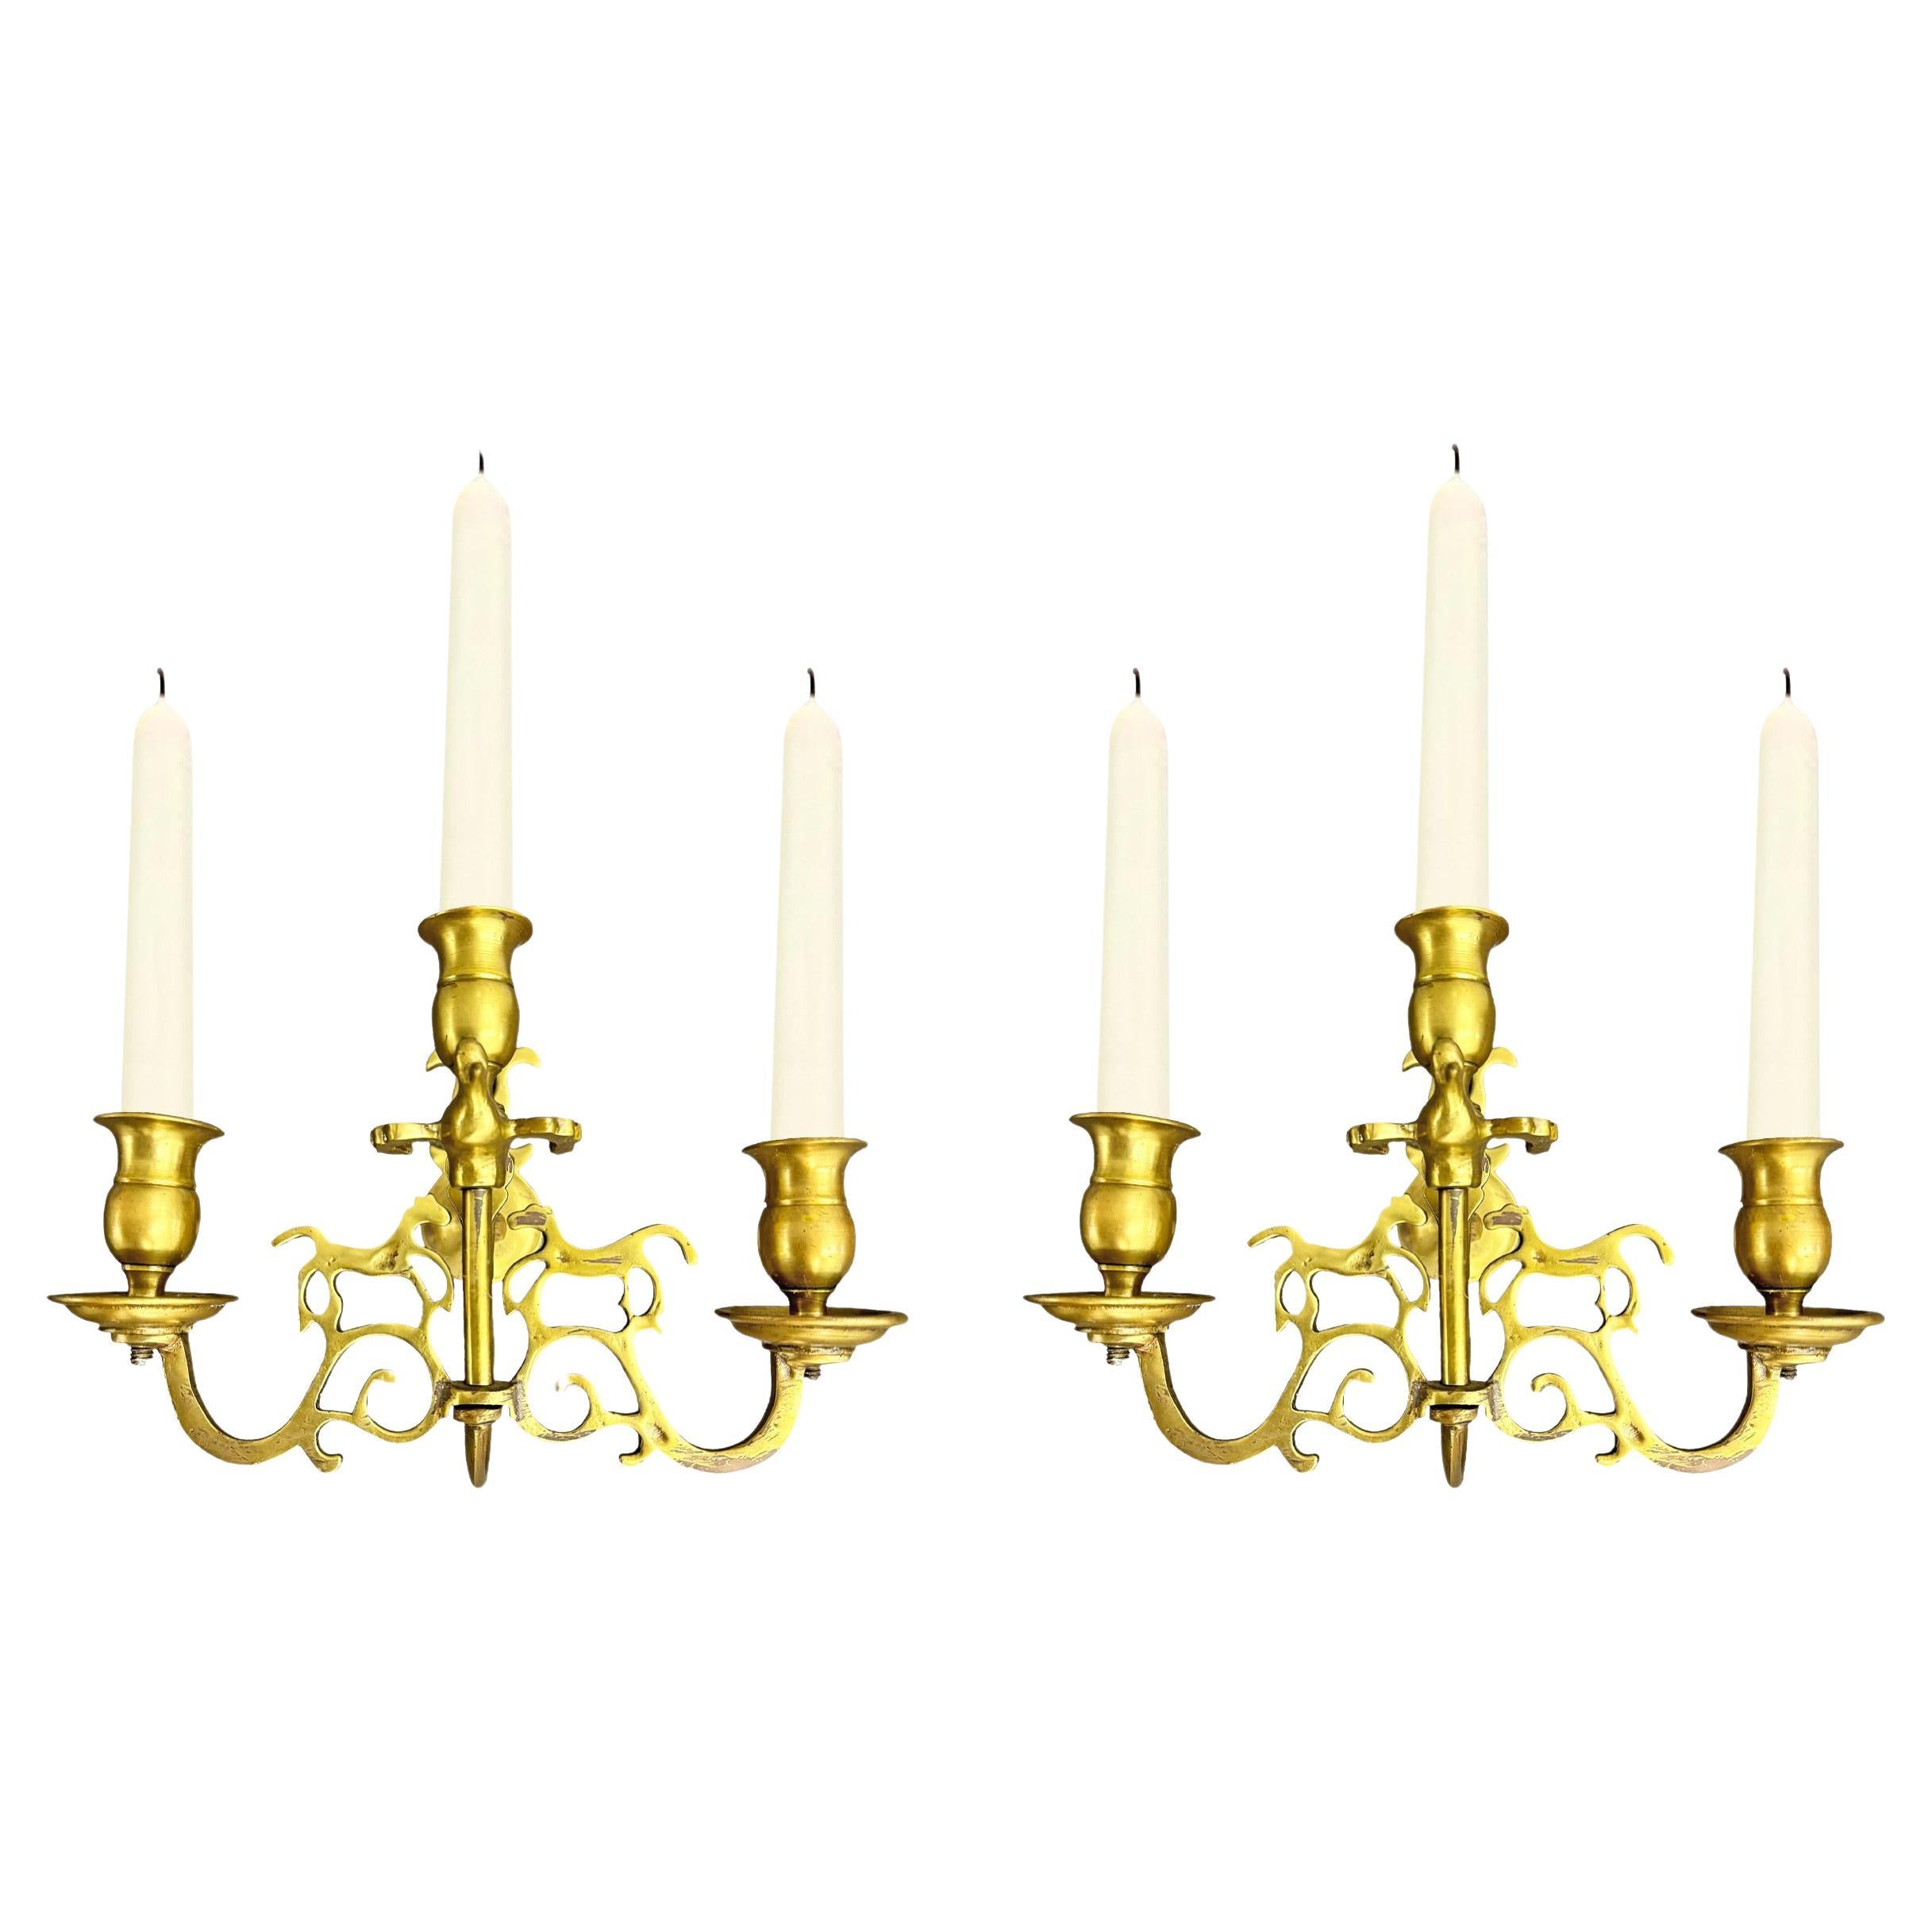 Pair of 18th Century English Georgian Brass Candle Sconces